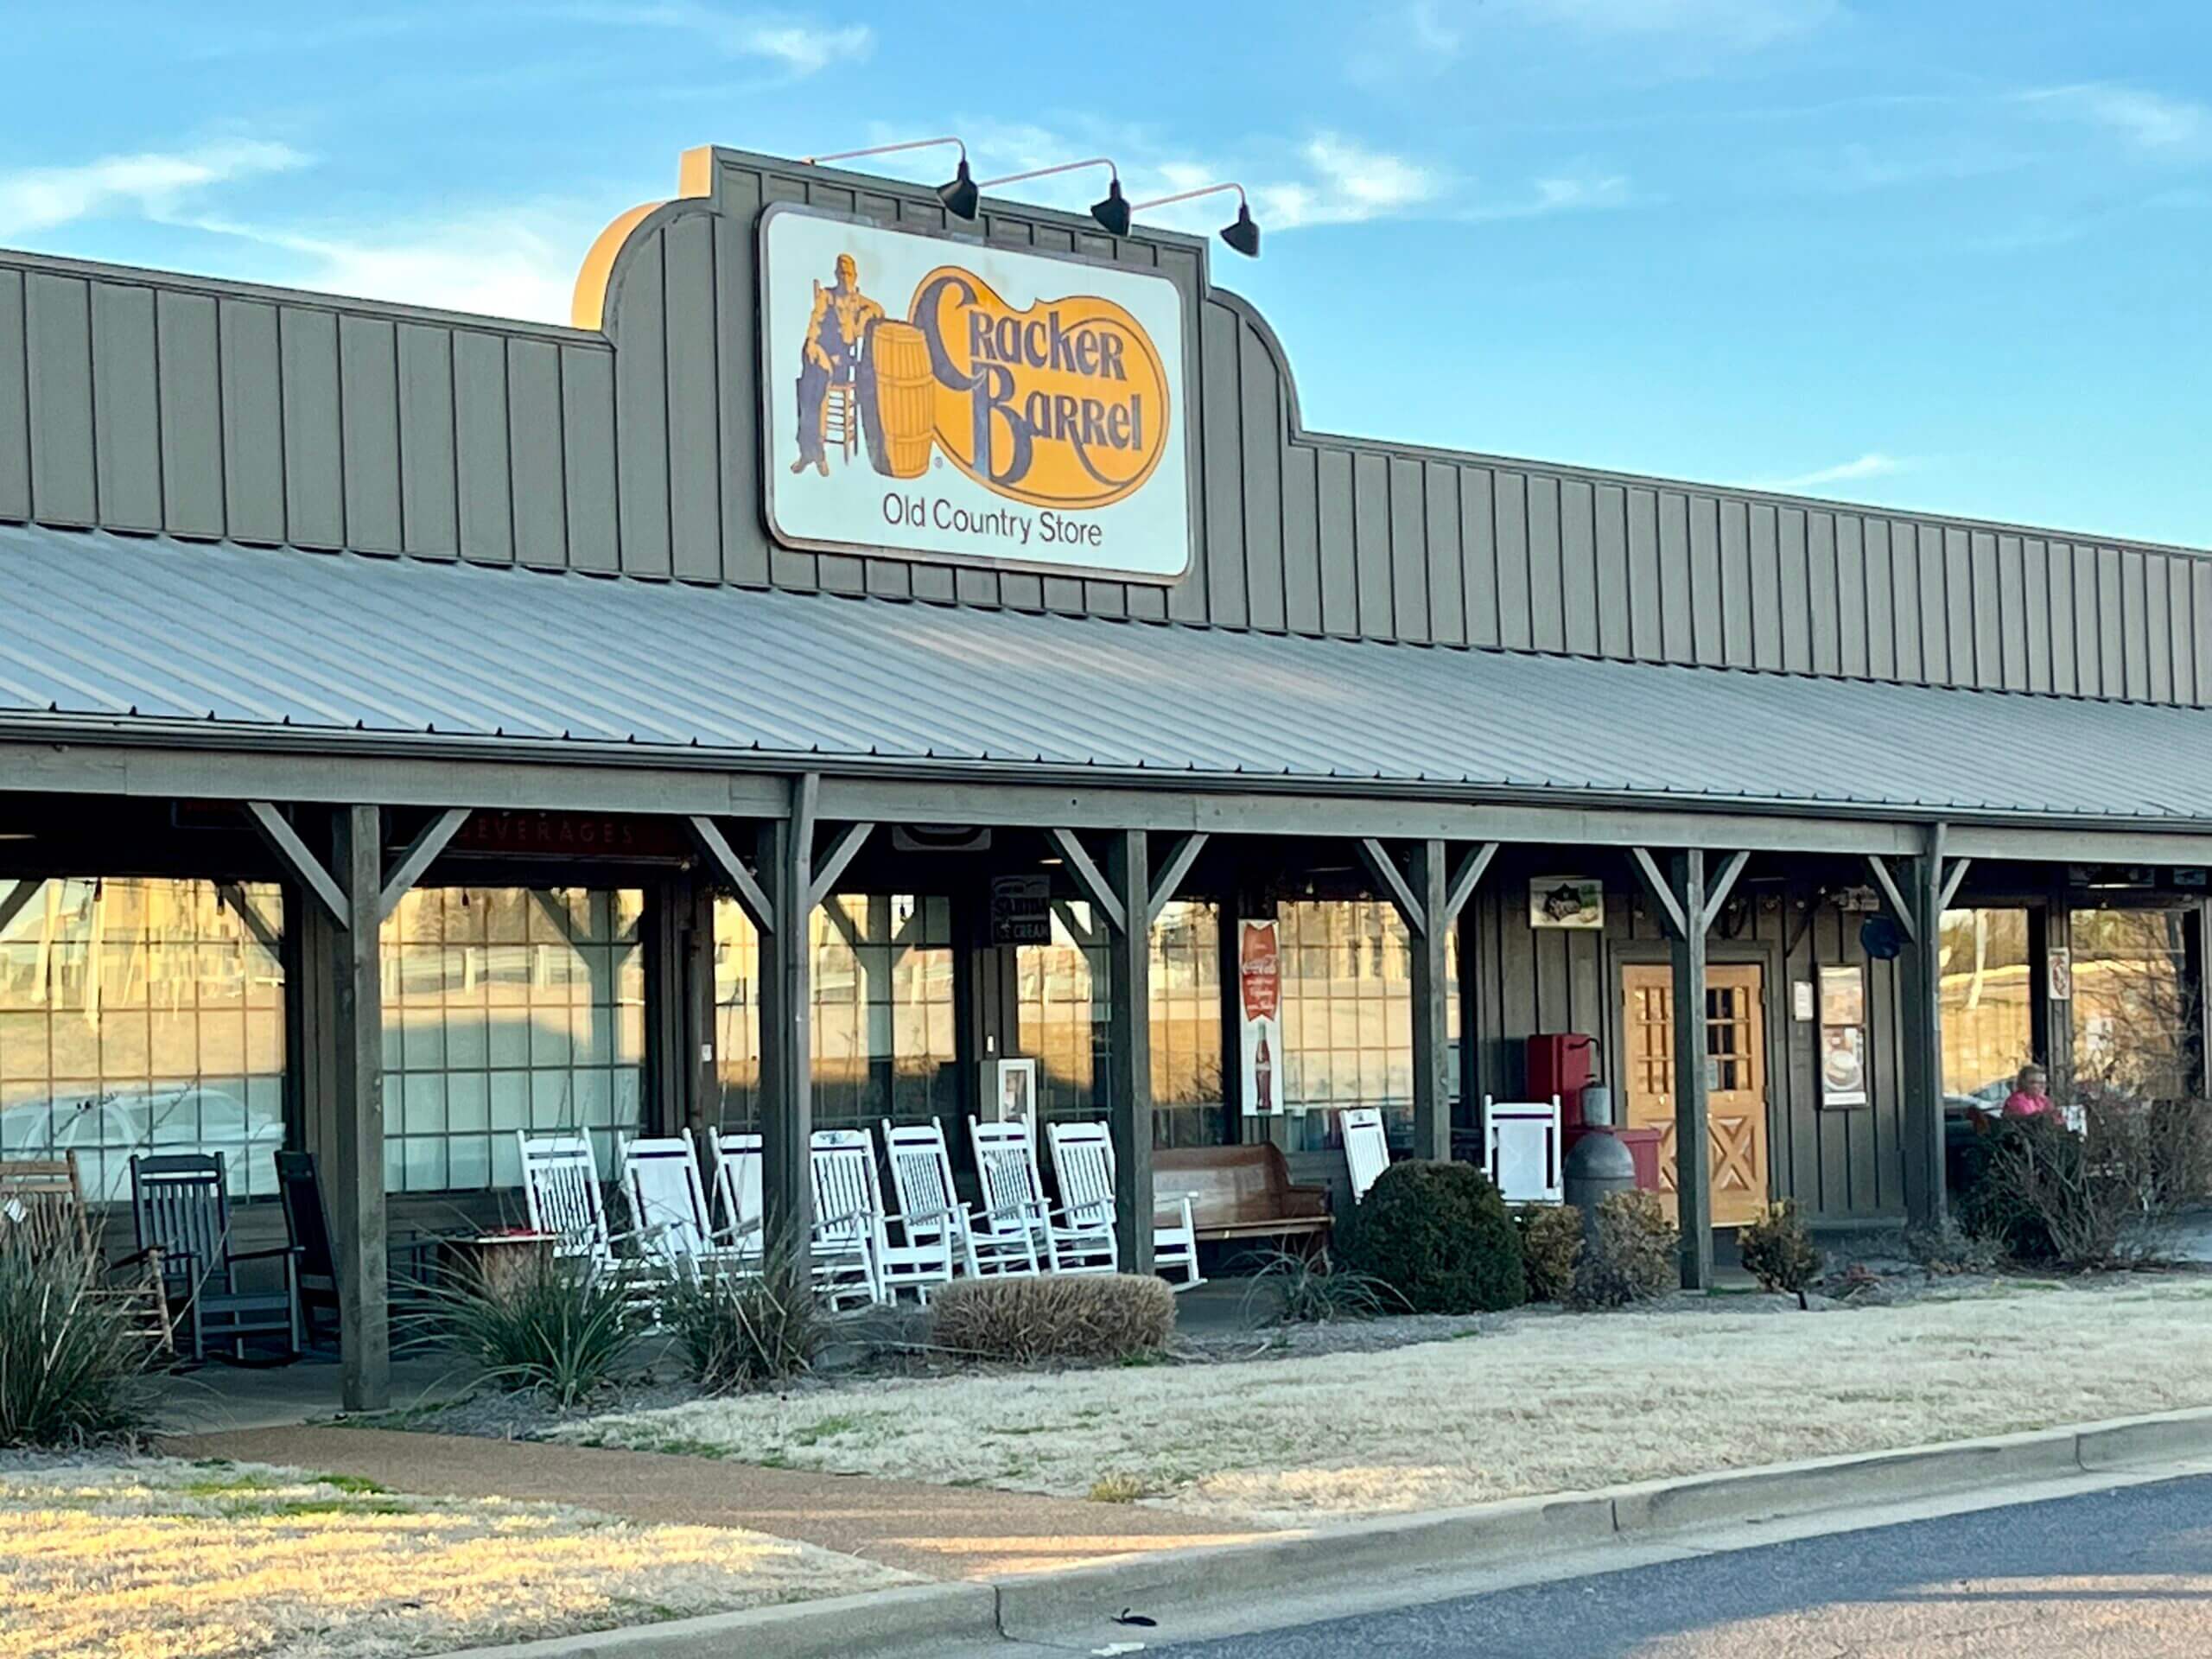 Pop the Question and win free Cracker Barrel for a year DeSoto County